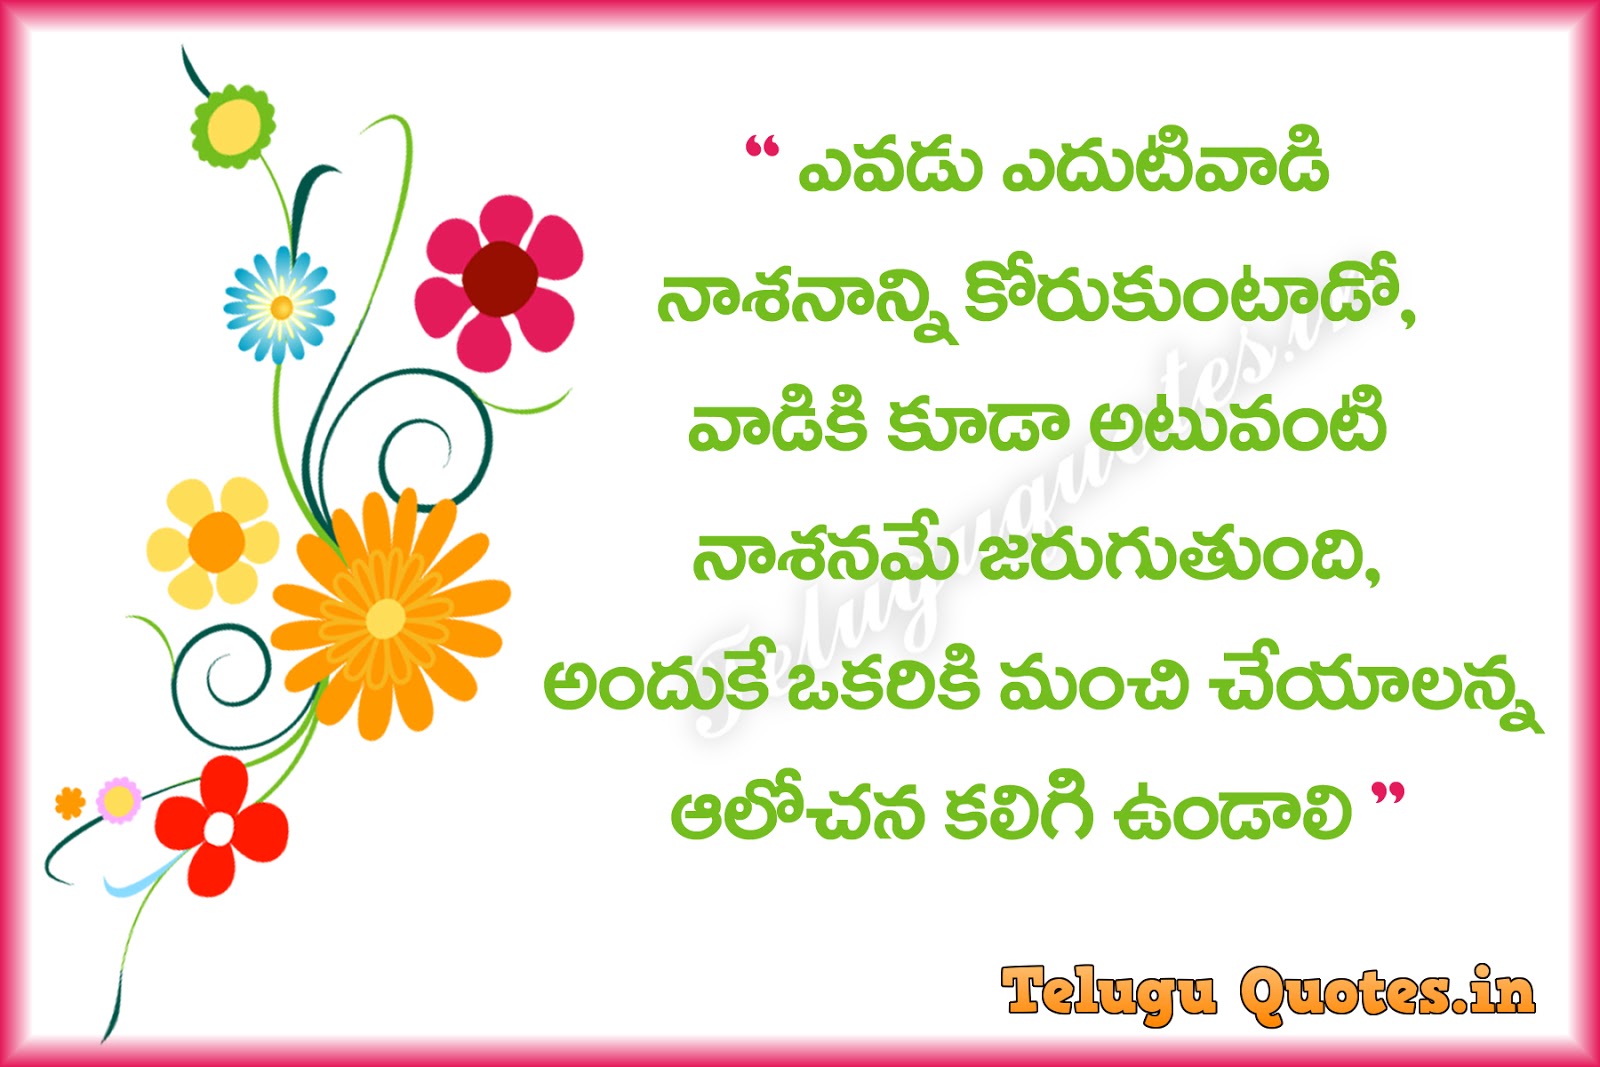 Inspiration quotes Inspirational quotes Good Inspiration quotes in Telugu Whatsapp Success Messages Manchi Maatalu about Life